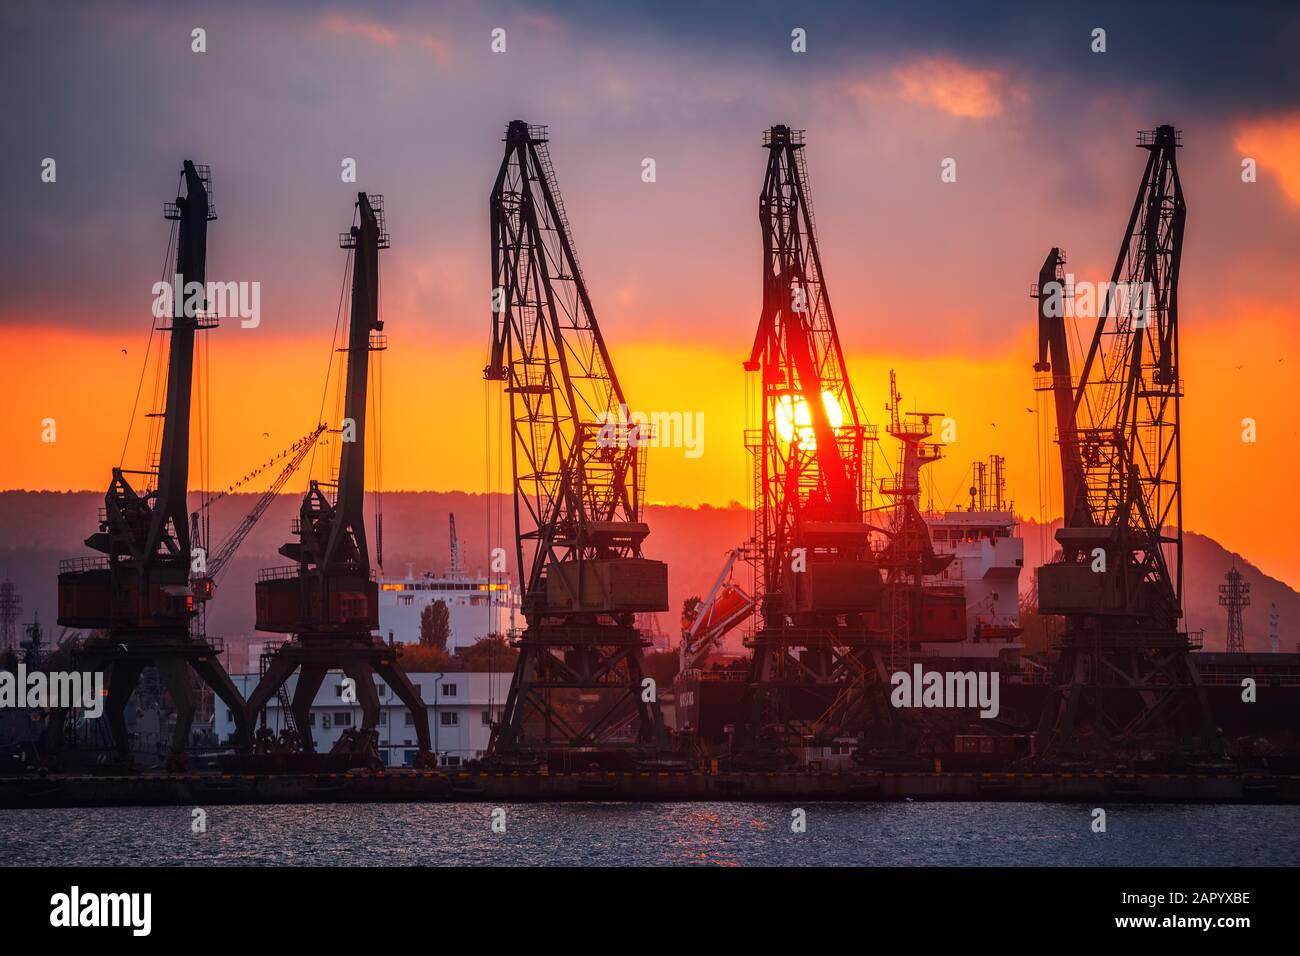 Colorful sunset over sea port and industrial cranes, Varna, Bulgaria Stock Photo